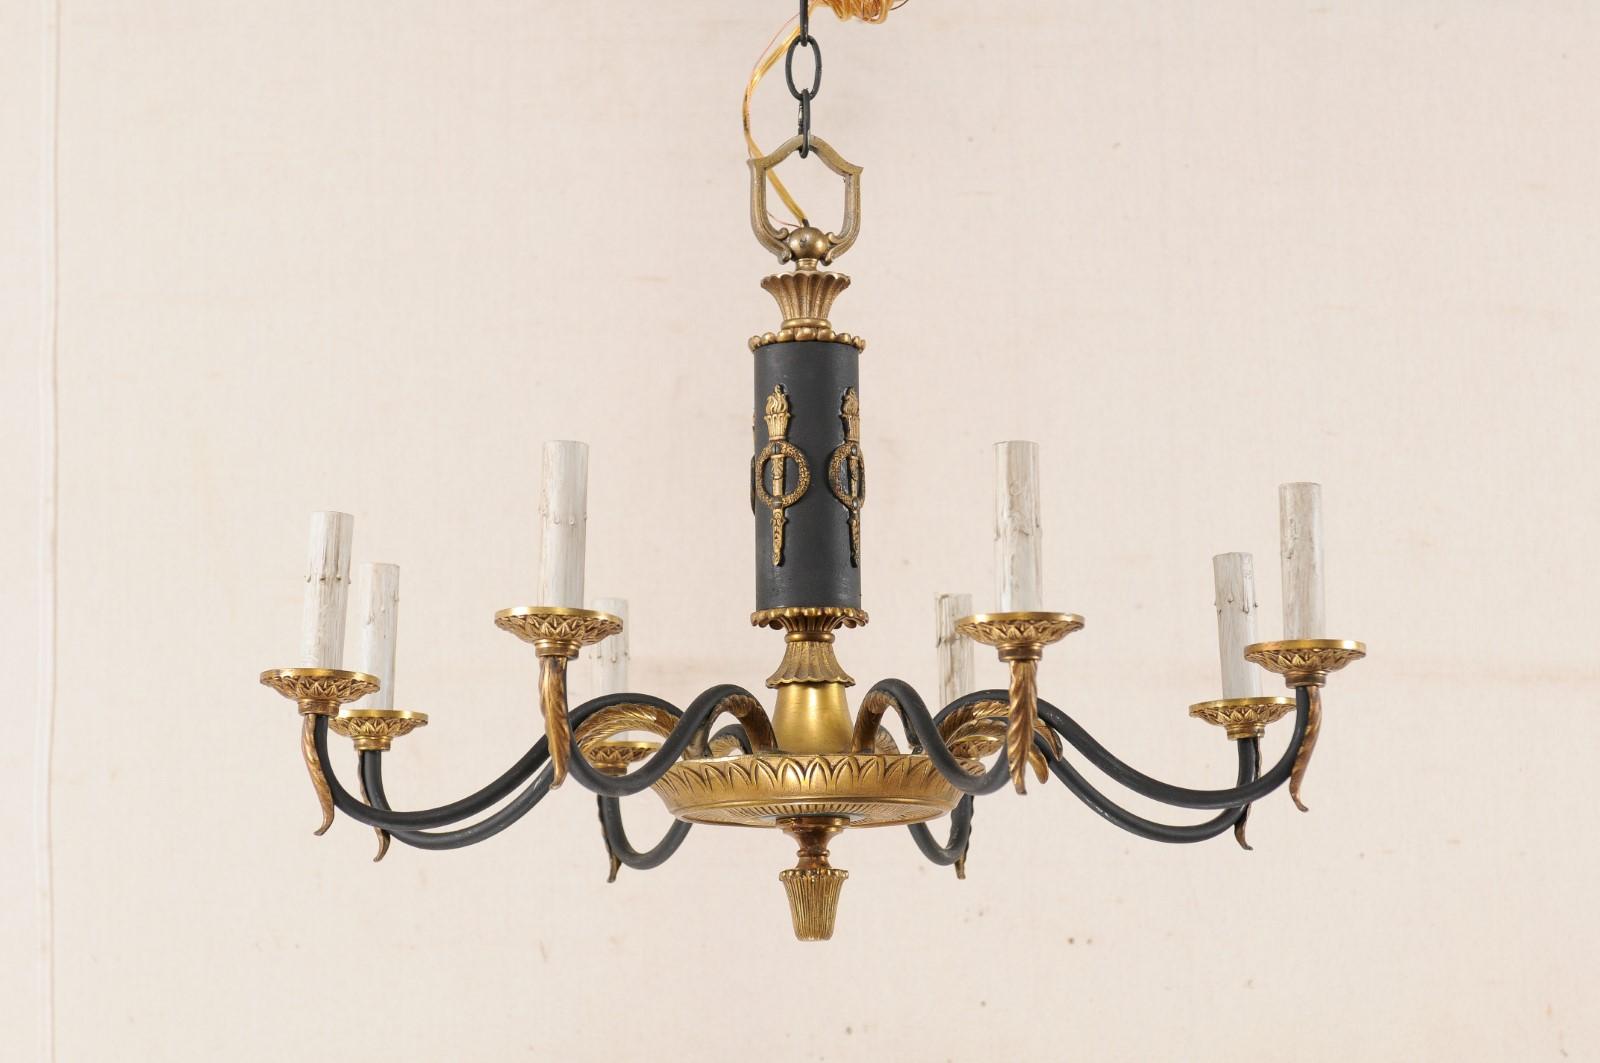 A Swedish eight-light black and gold toned neoclassical style chandelier. This vintage chandelier from Sweden features a Neoclassical design with central column adorn in wreathed torches, and larger brass gallery in ribbed finish and leaf motif with